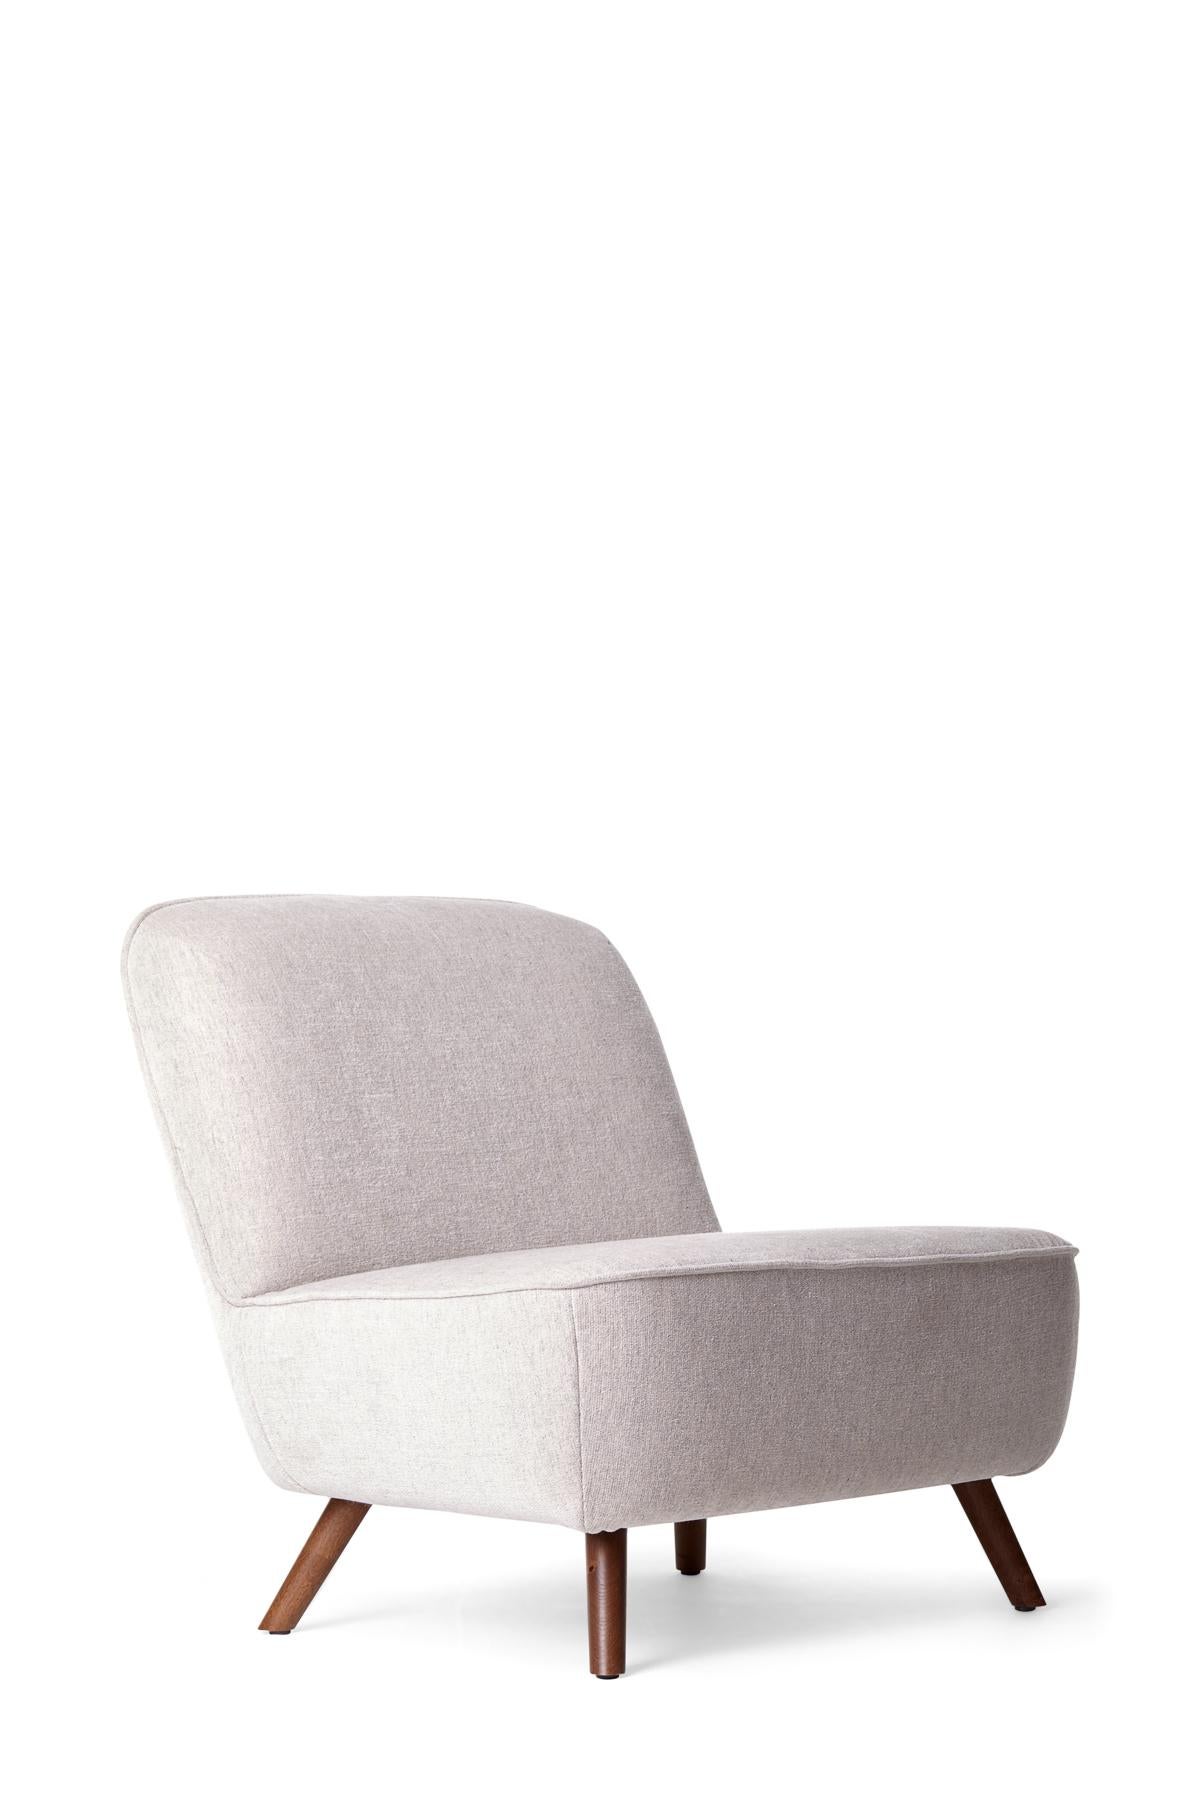 Mix the lightness of your favourite cocktail with the weight of Dutch historical heritage, while comfortably lounging in Marcel Wanders’ Cocktail chair. Its straightforward design is luxuriously enveloped in a stylish signature woven textile,